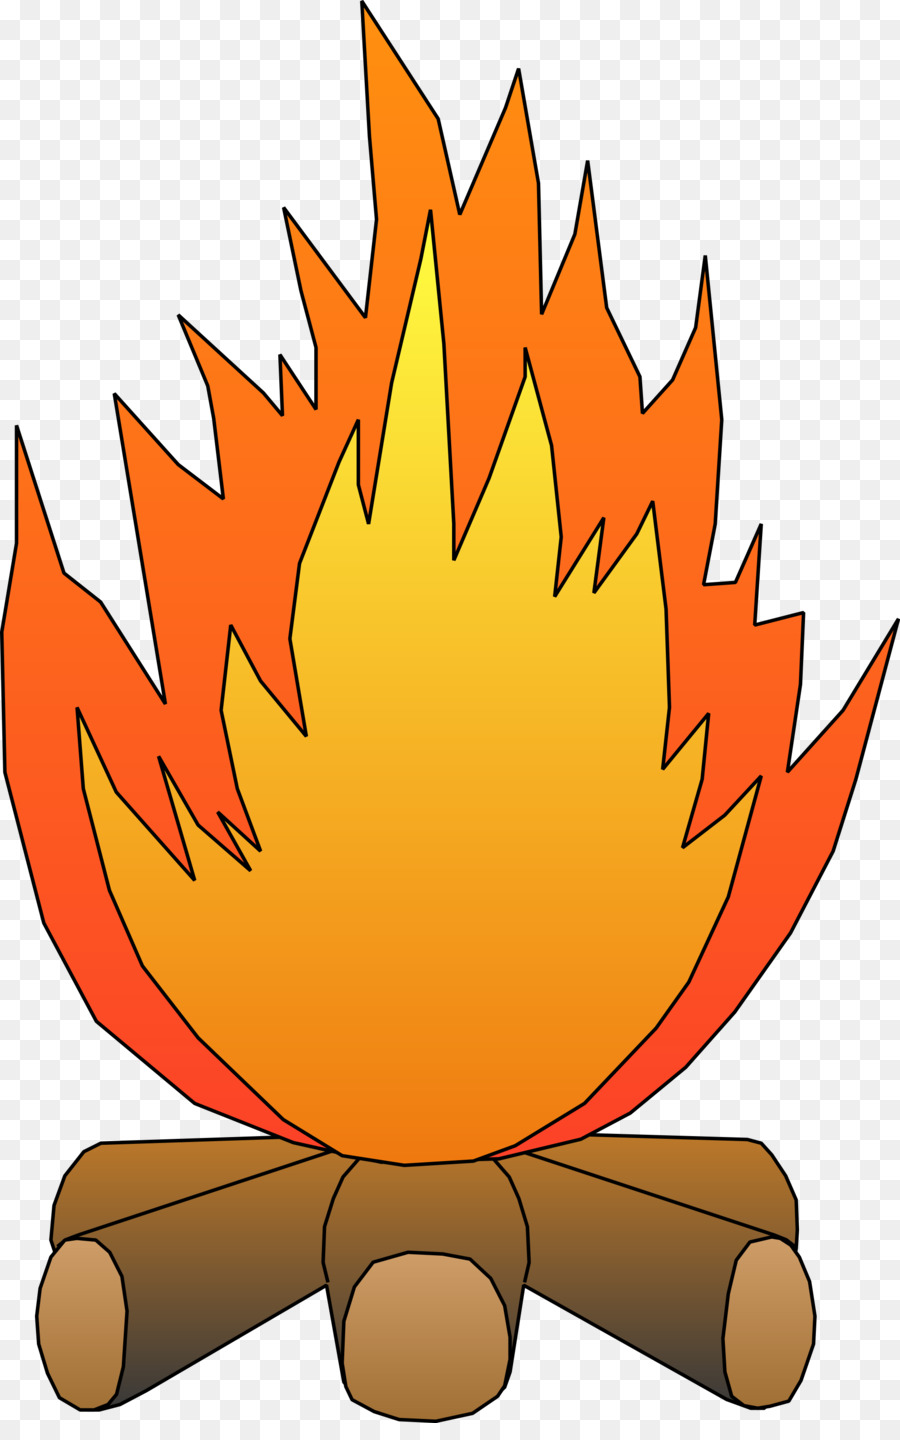 Fire Flame Clip art - Campfire Cliparts png download - 1979*3130 - Free Transparent Fire png Download.